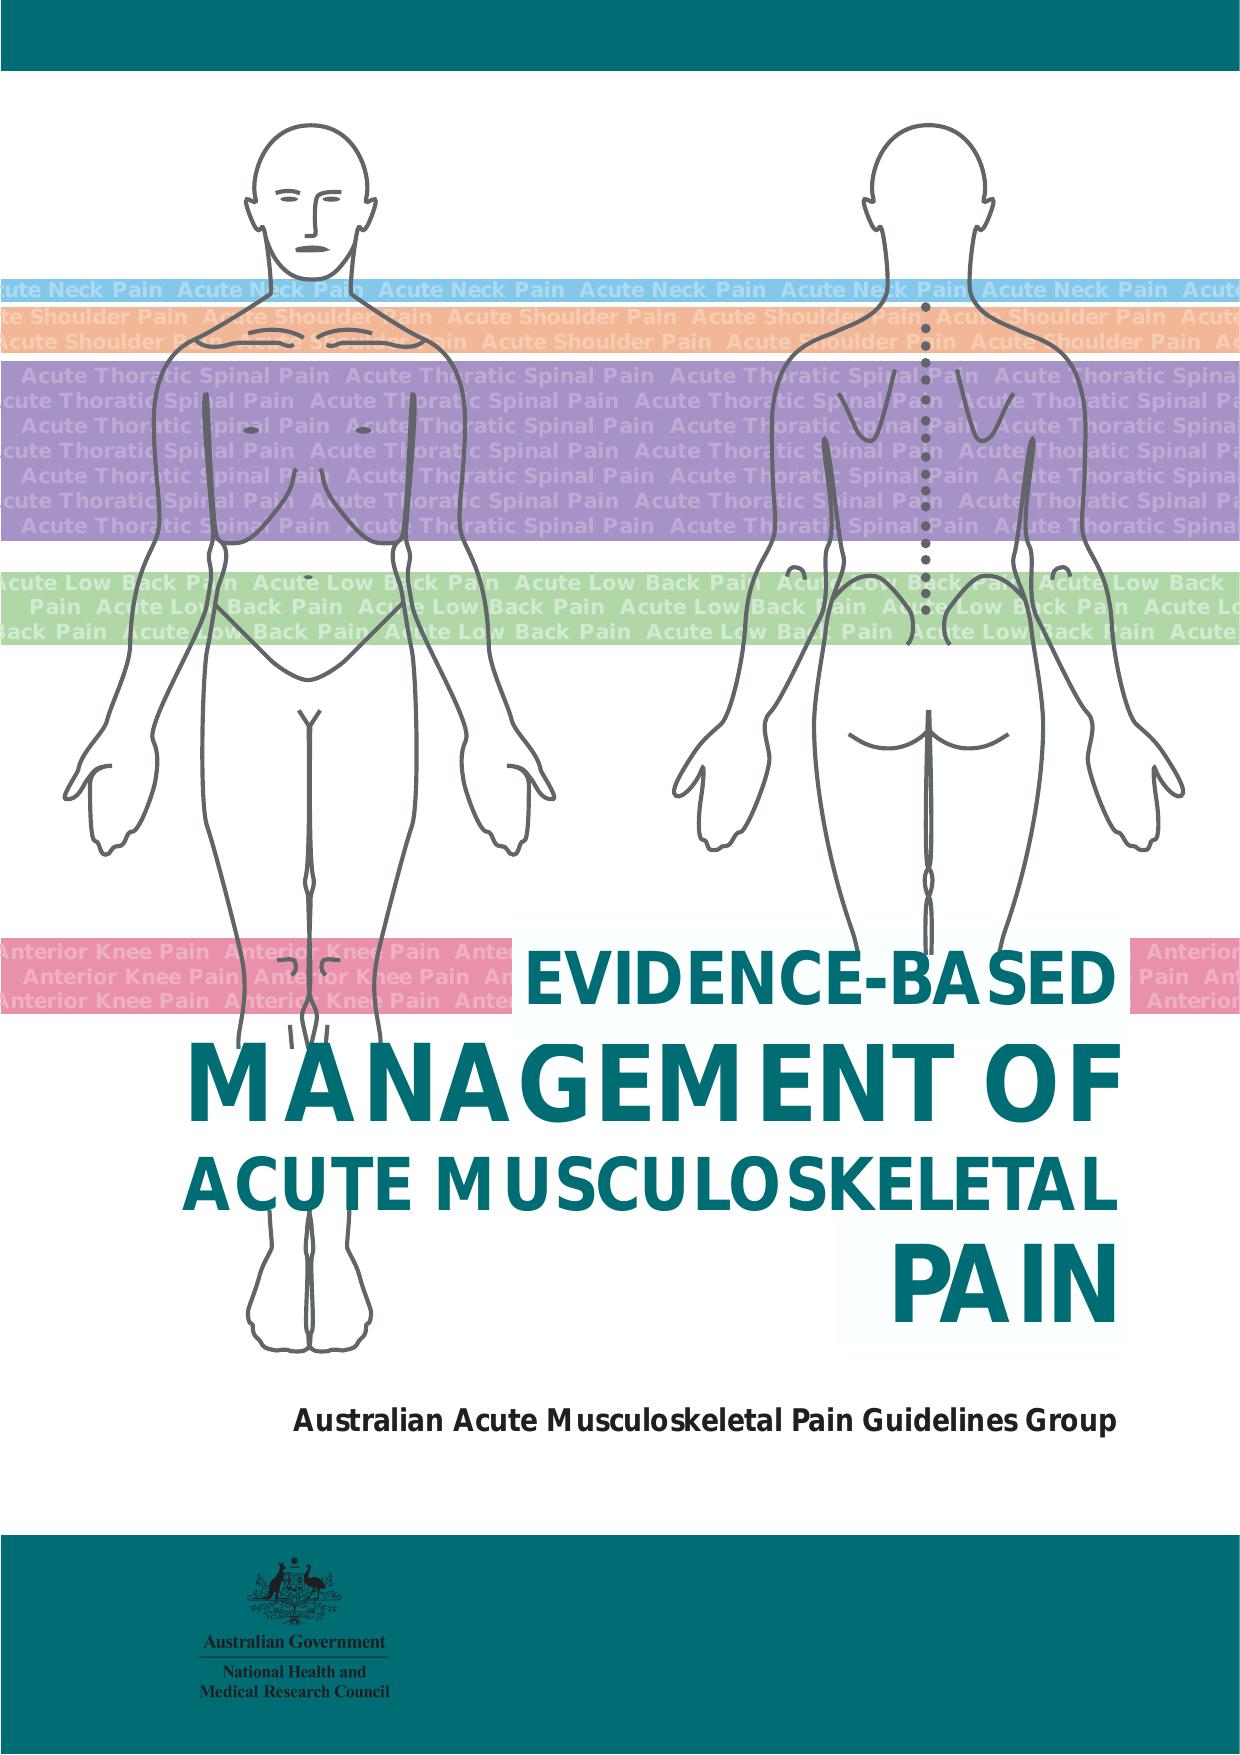 Evidence-Based Management of Acute Musculoskeletal Pain